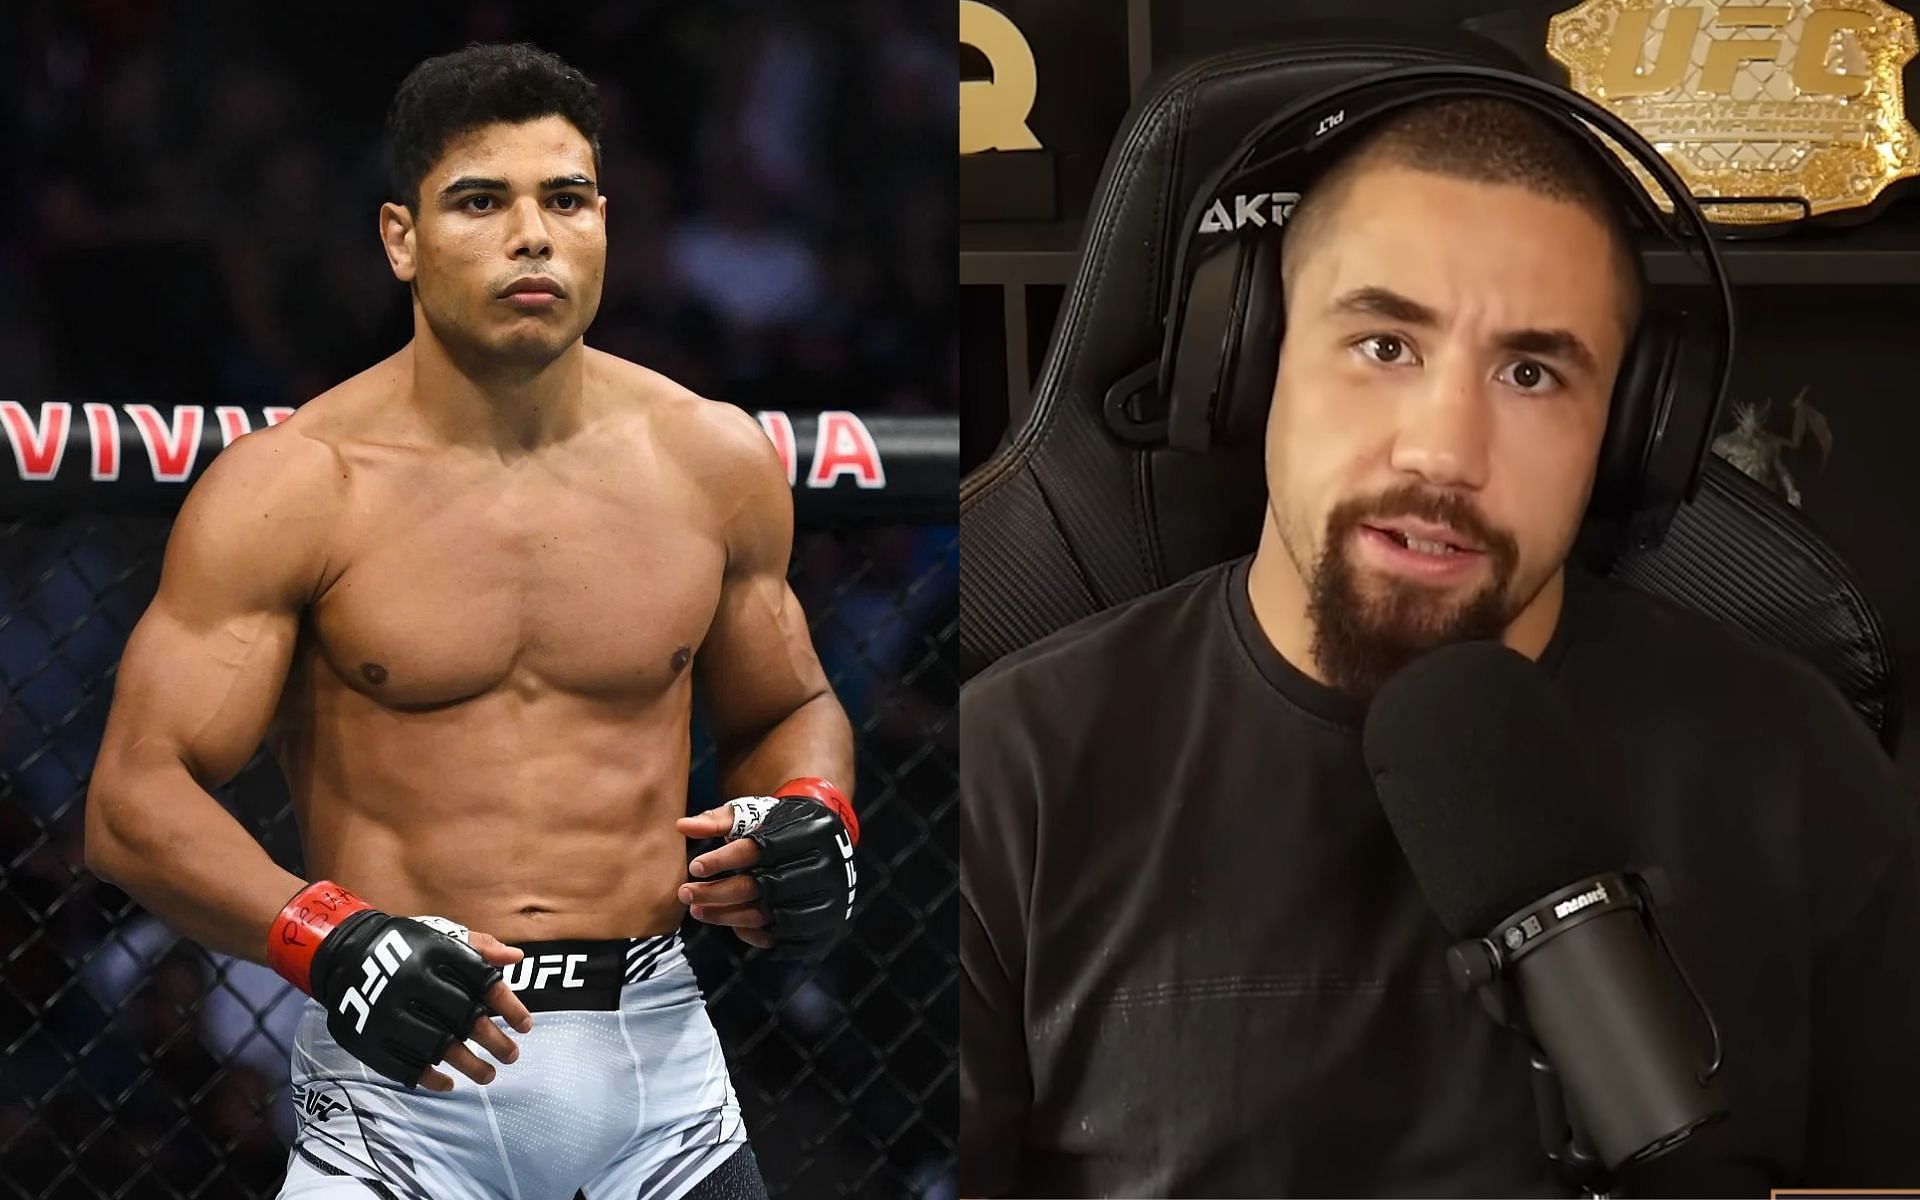 Robert Whittaker (right) will enter his UFC 298 bout with Paulo Costa (left) hungrier than ever [Images Courtesy: @GettyImages and @MMArcadePodcast on YouTube]